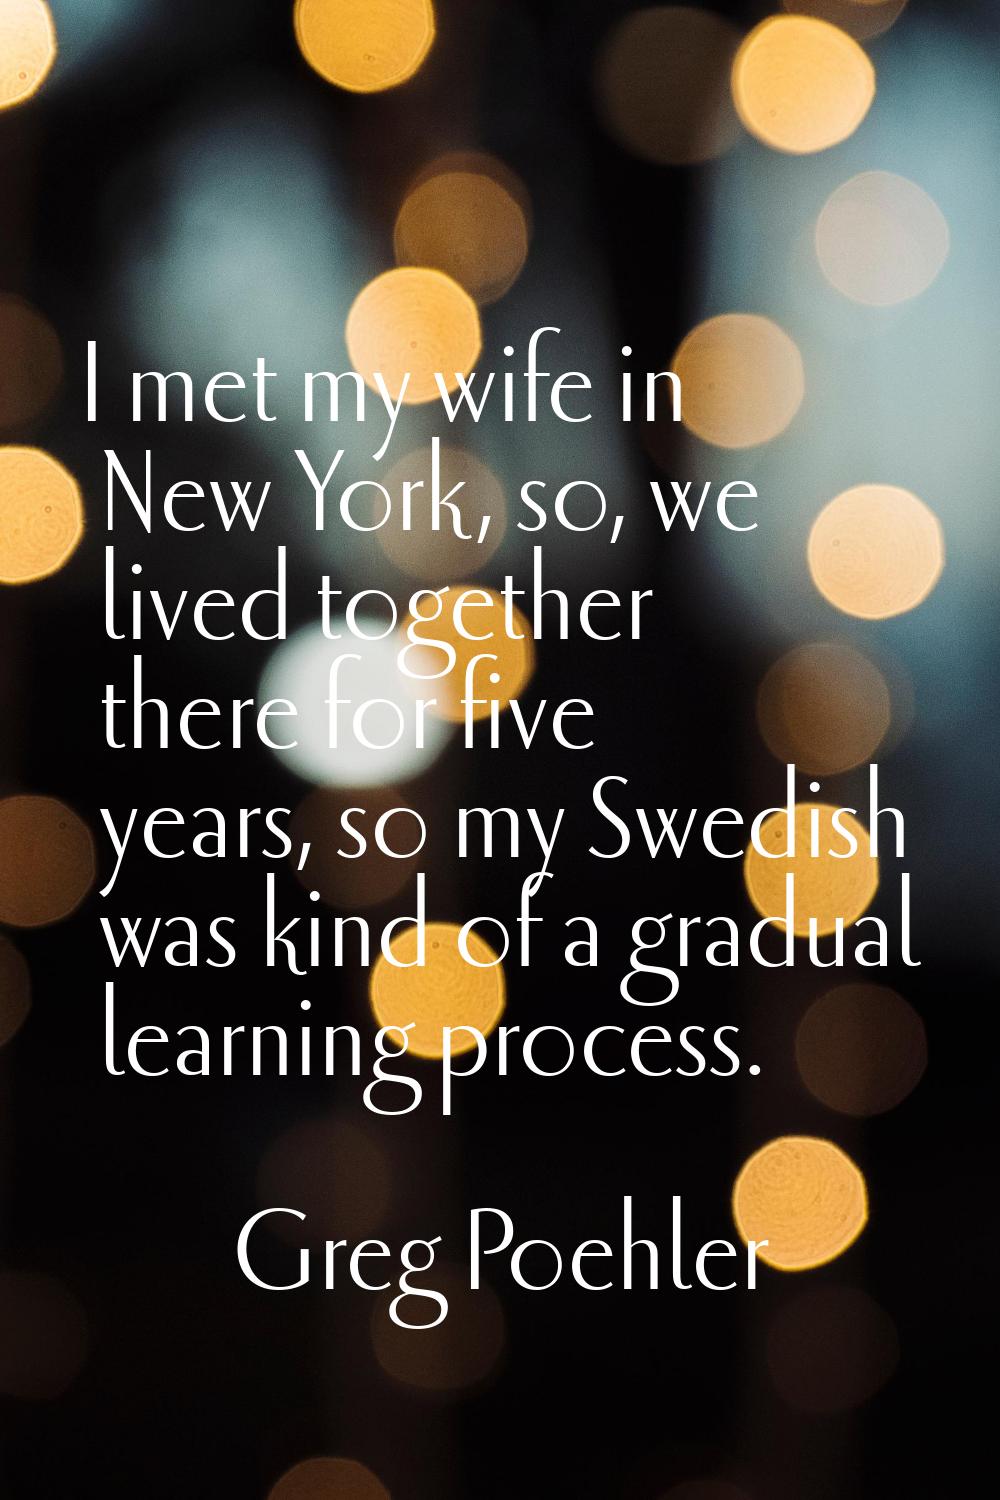 I met my wife in New York, so, we lived together there for five years, so my Swedish was kind of a 